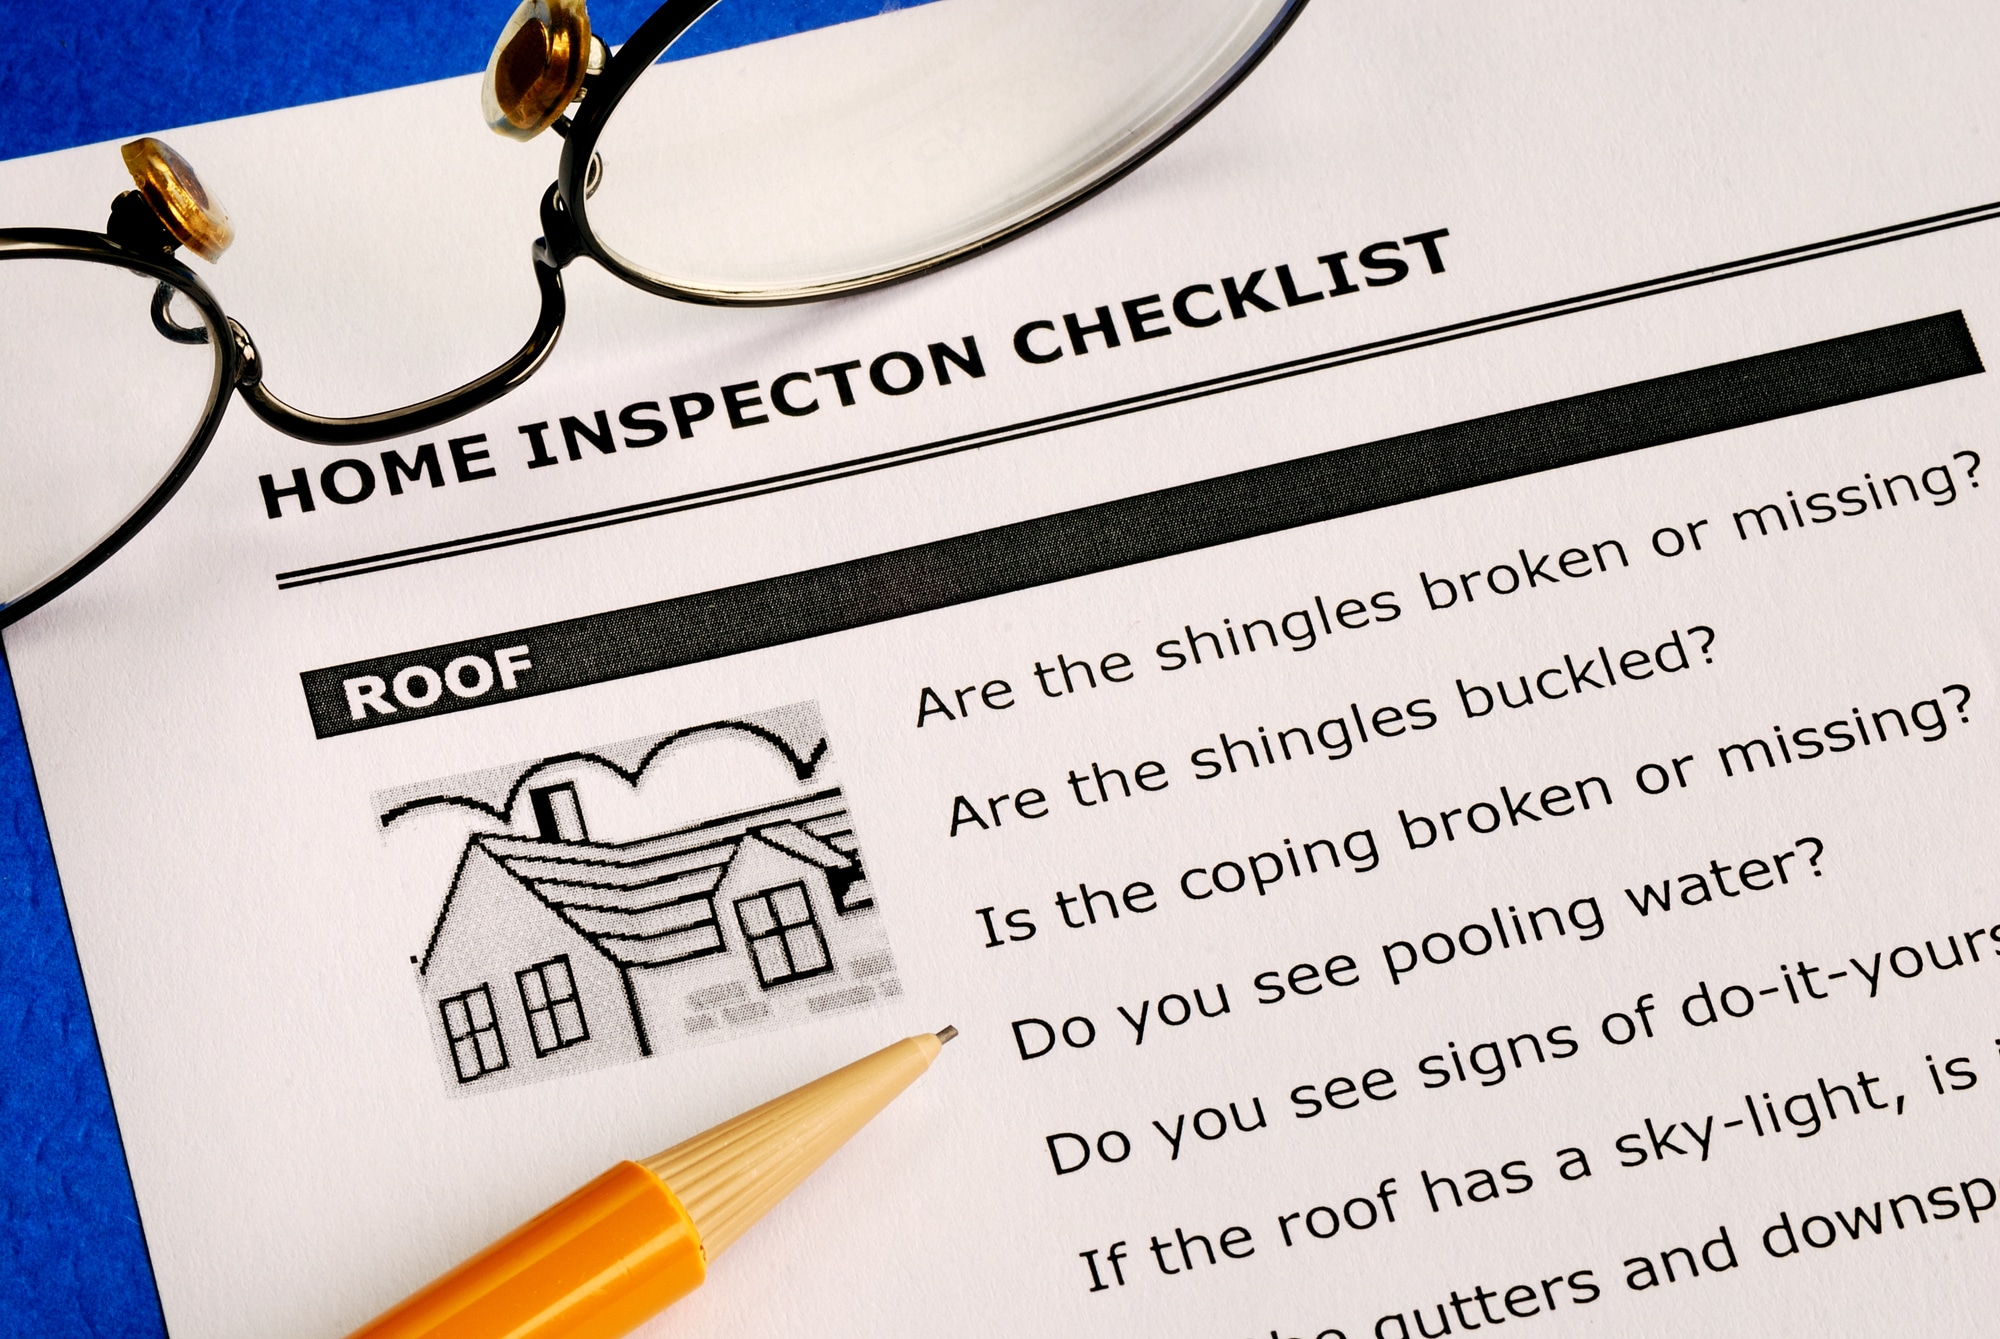 Home inspection checklist with pencil